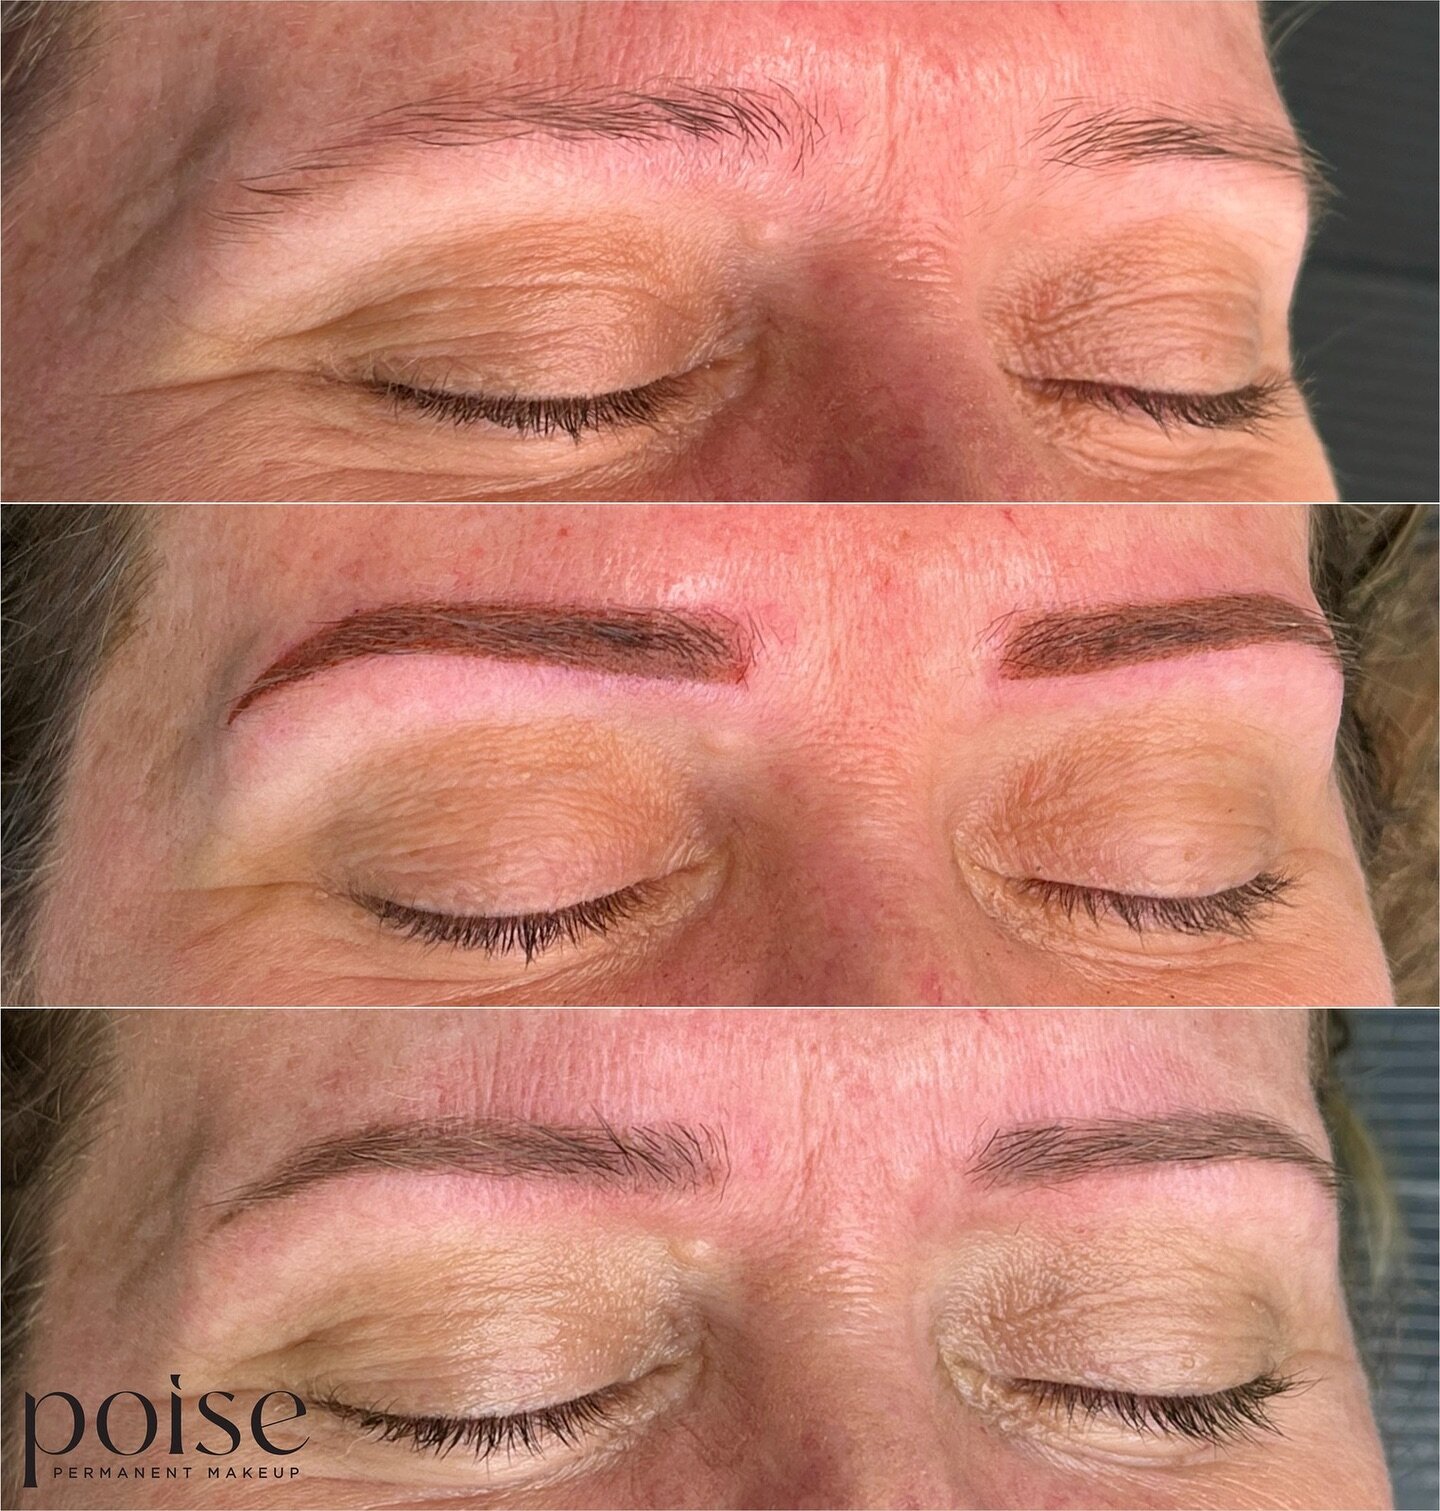 Your eyebrows but better ❤️

This lady drew on a very natural eyebrow pencil daily so I wanted to keep the finish of the tattoo in line with that. 

1. Natural before
2. Straight after - you can see a lot of warmth from the pigment and also trauma to